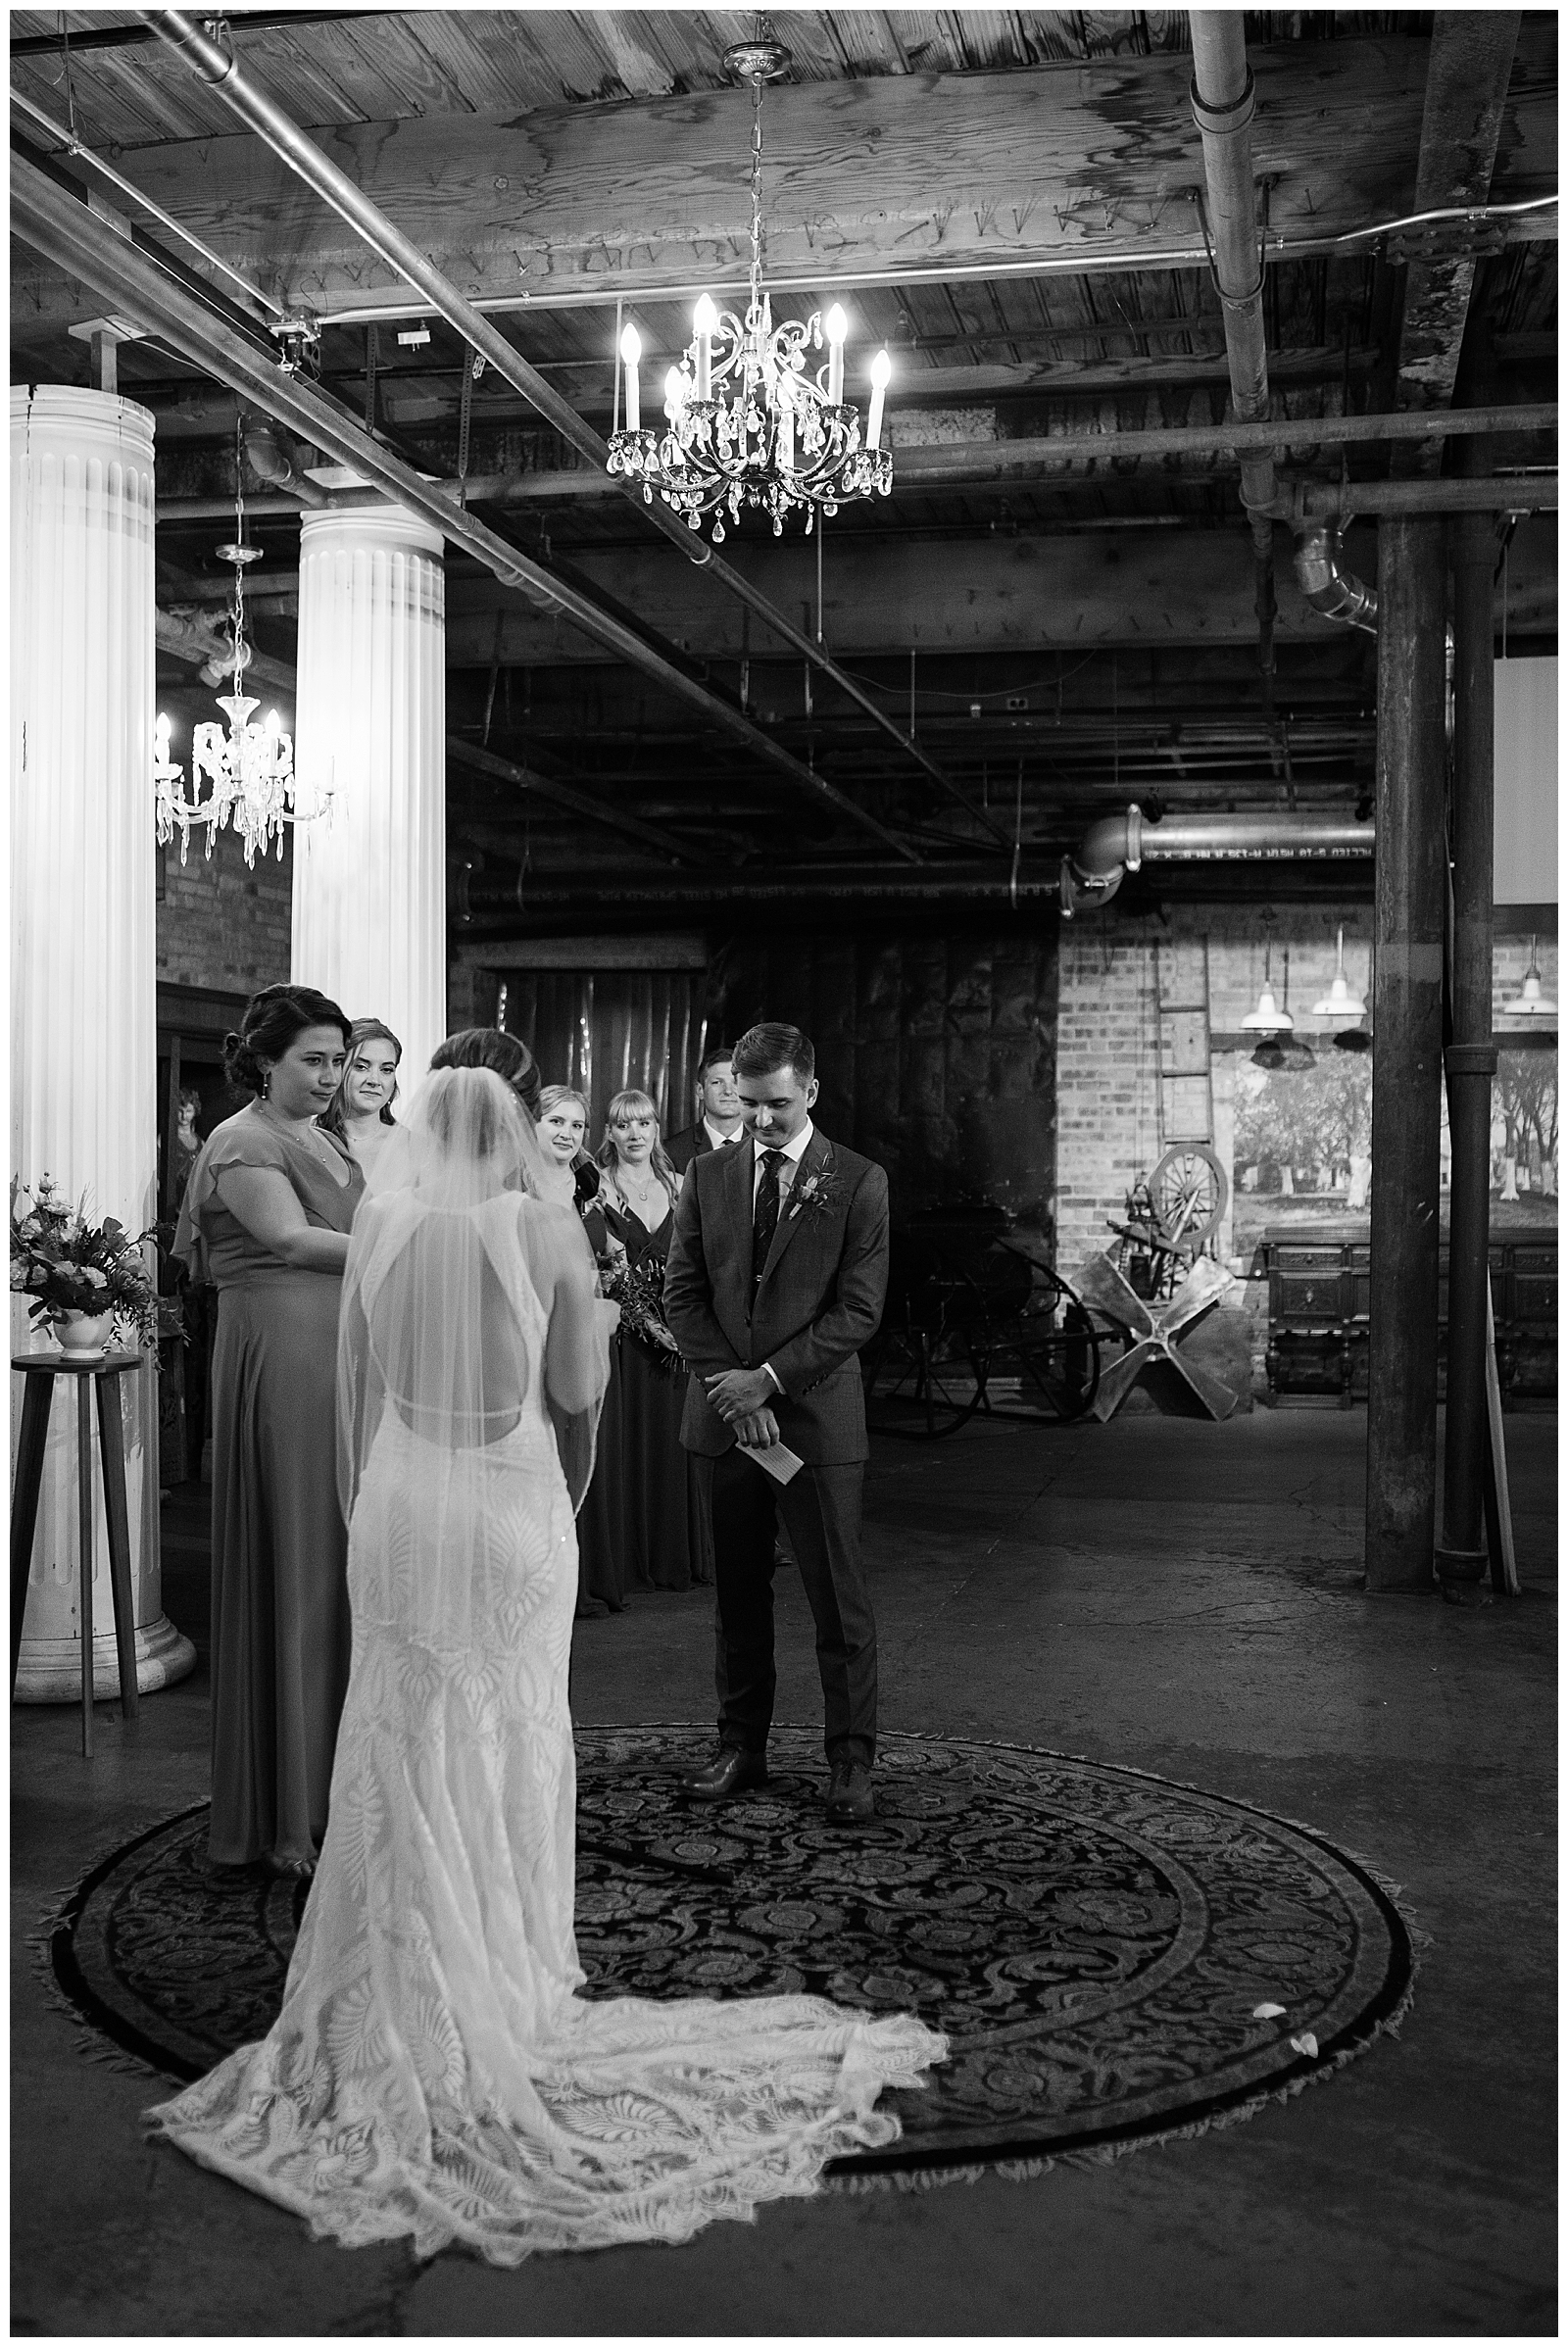 Getting married at Salvage One in Chicago 